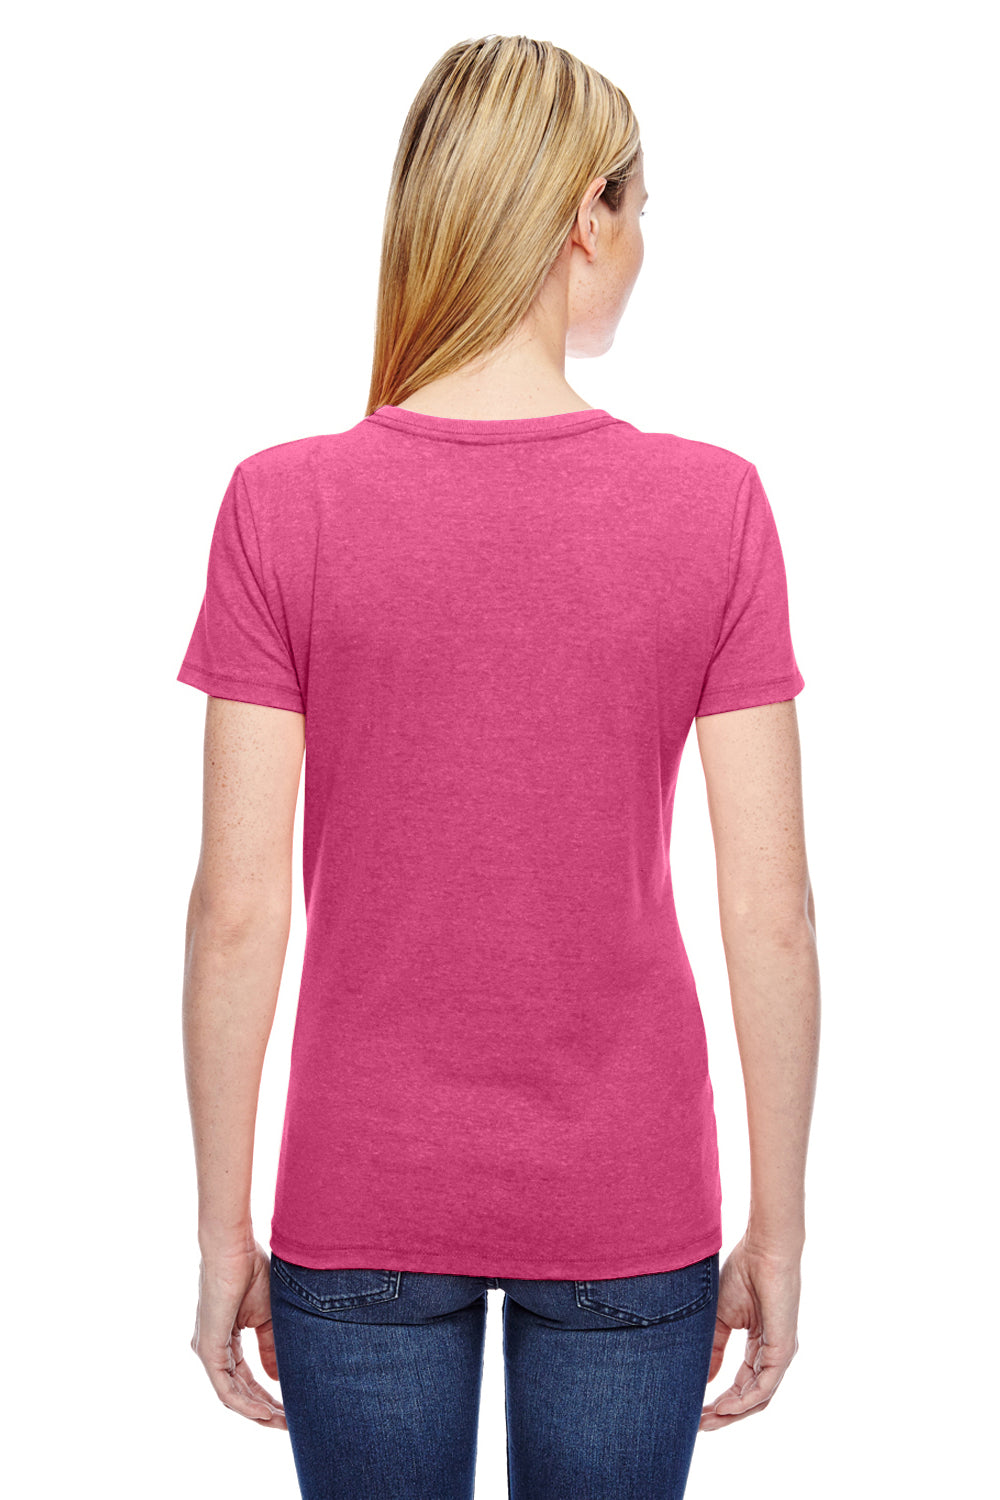 Fruit Of The Loom L3930R Womens HD Jersey Short Sleeve Crewneck T-Shirt Heather Pink Back